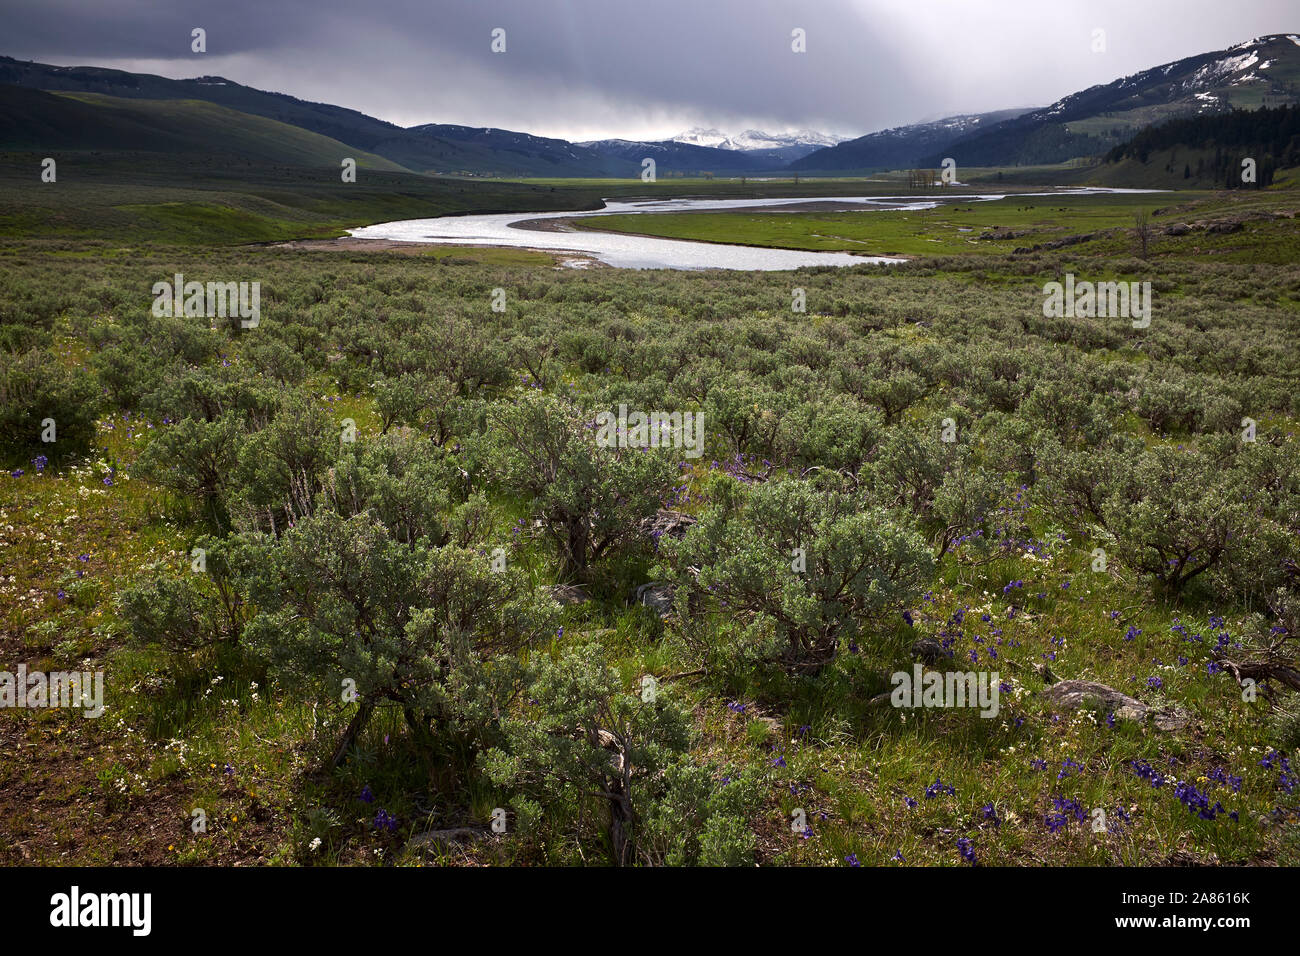 Mountain Scenery in the Lamar Valley, Yellowstone National Park, Wyoming, USA Stock Photo